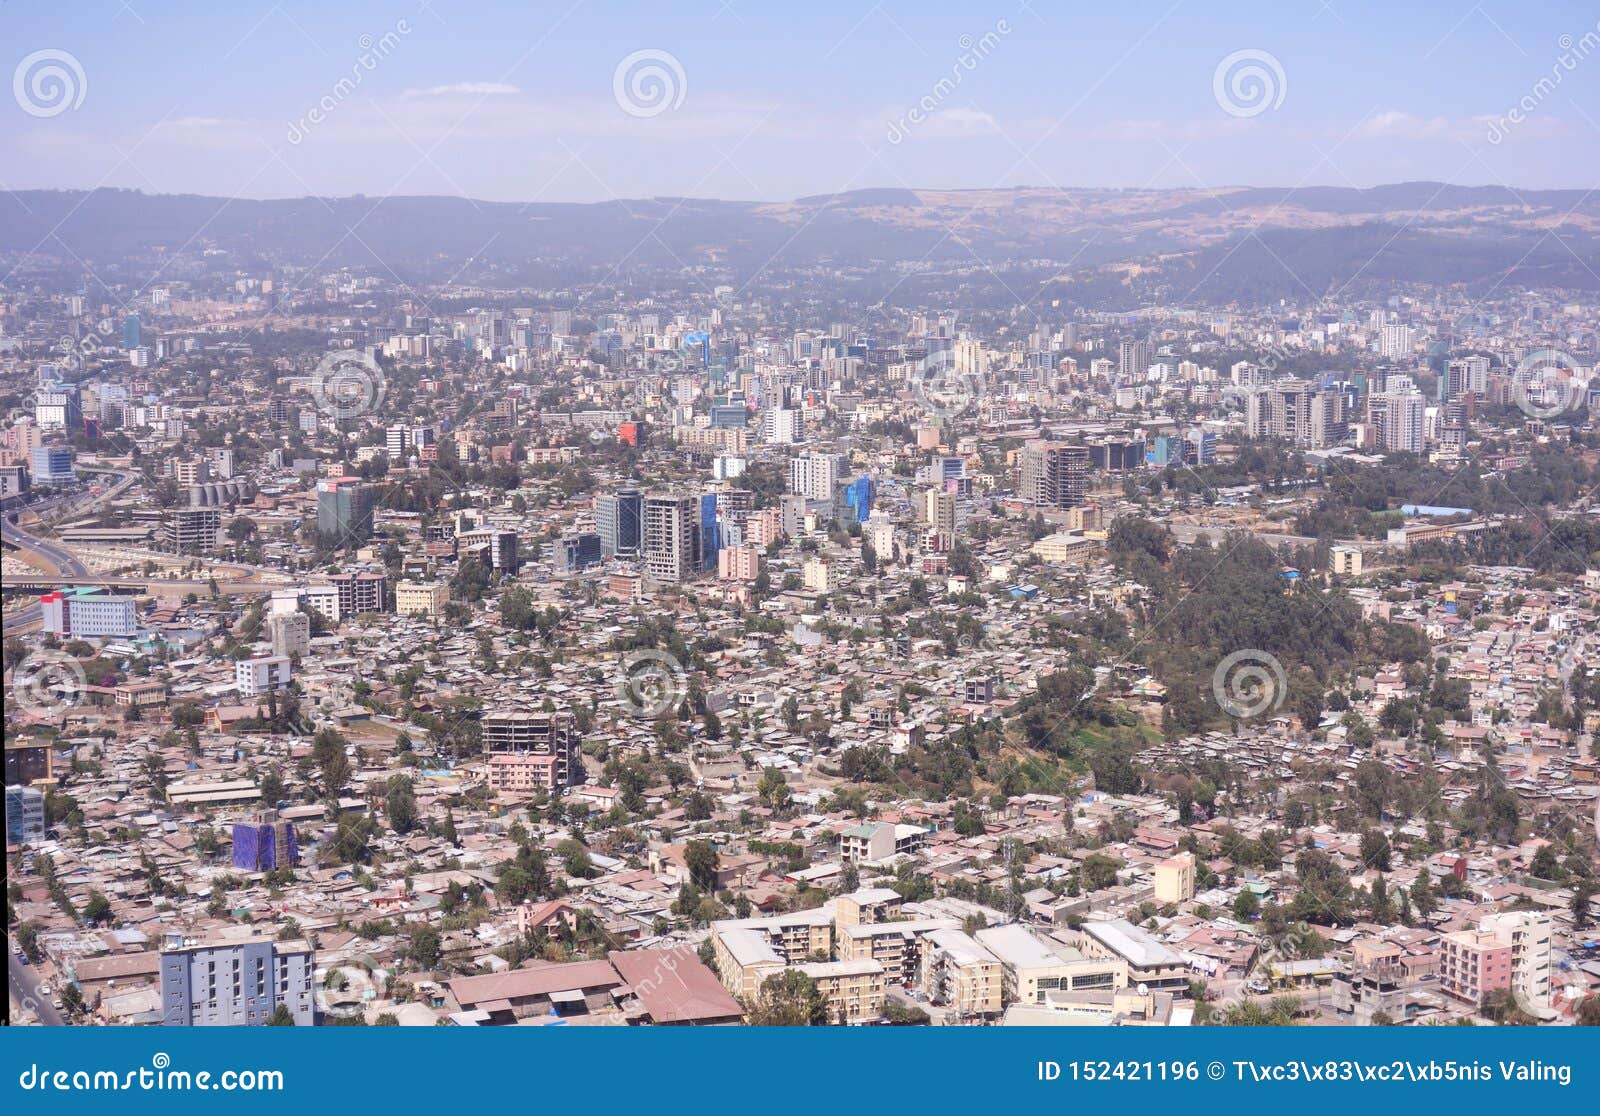 areal view of addis ababa